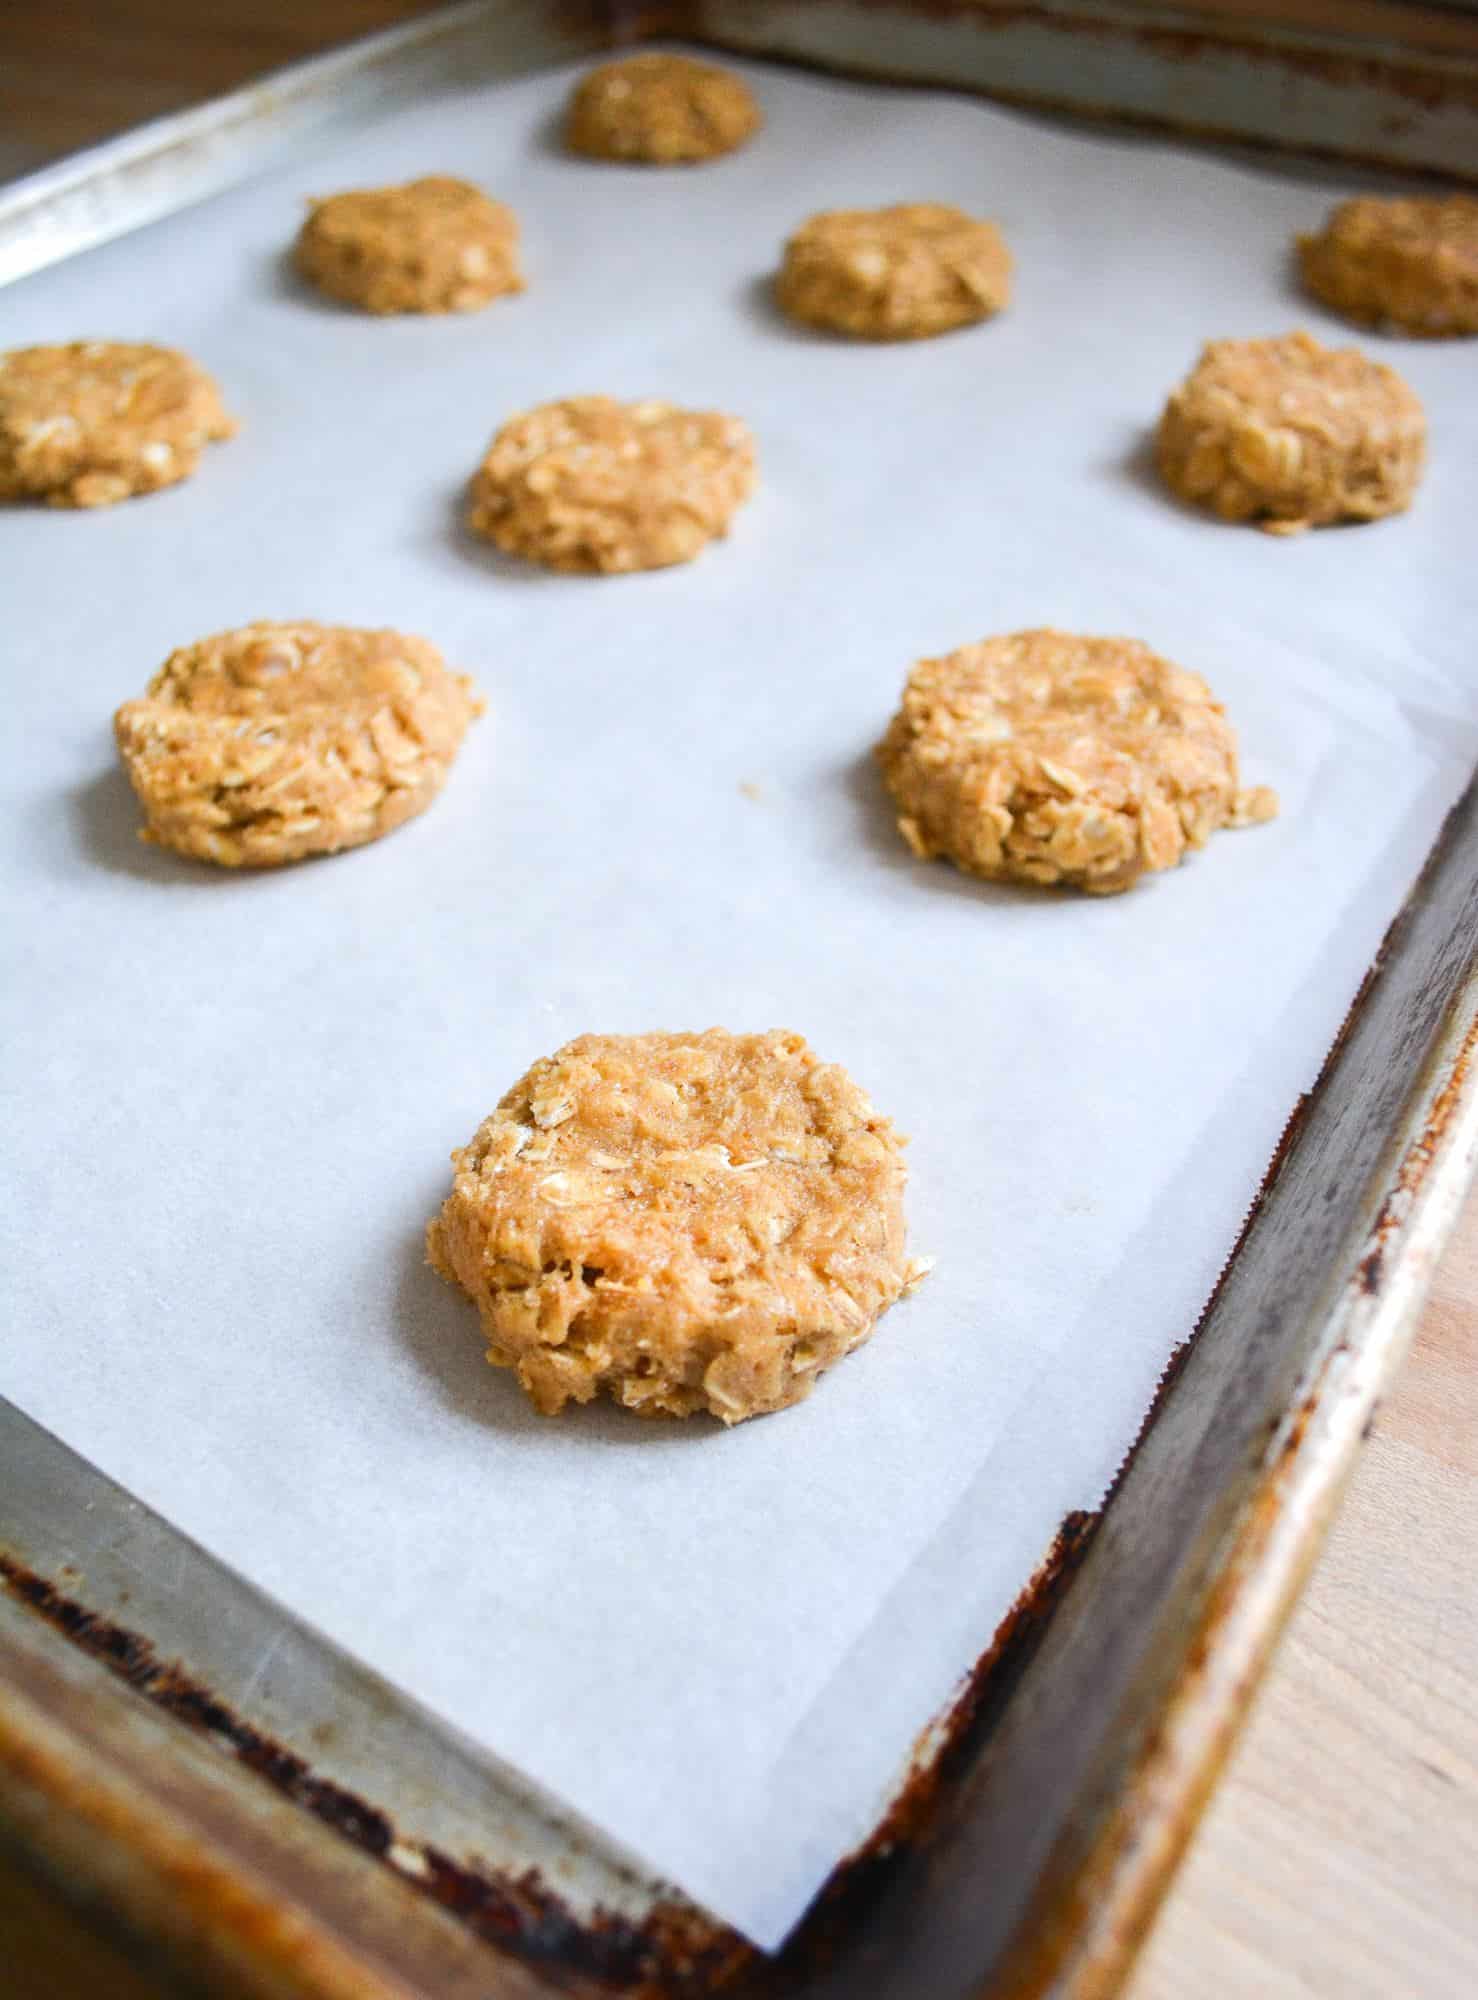 Oatmeal cookies on a sheet ready to be baked